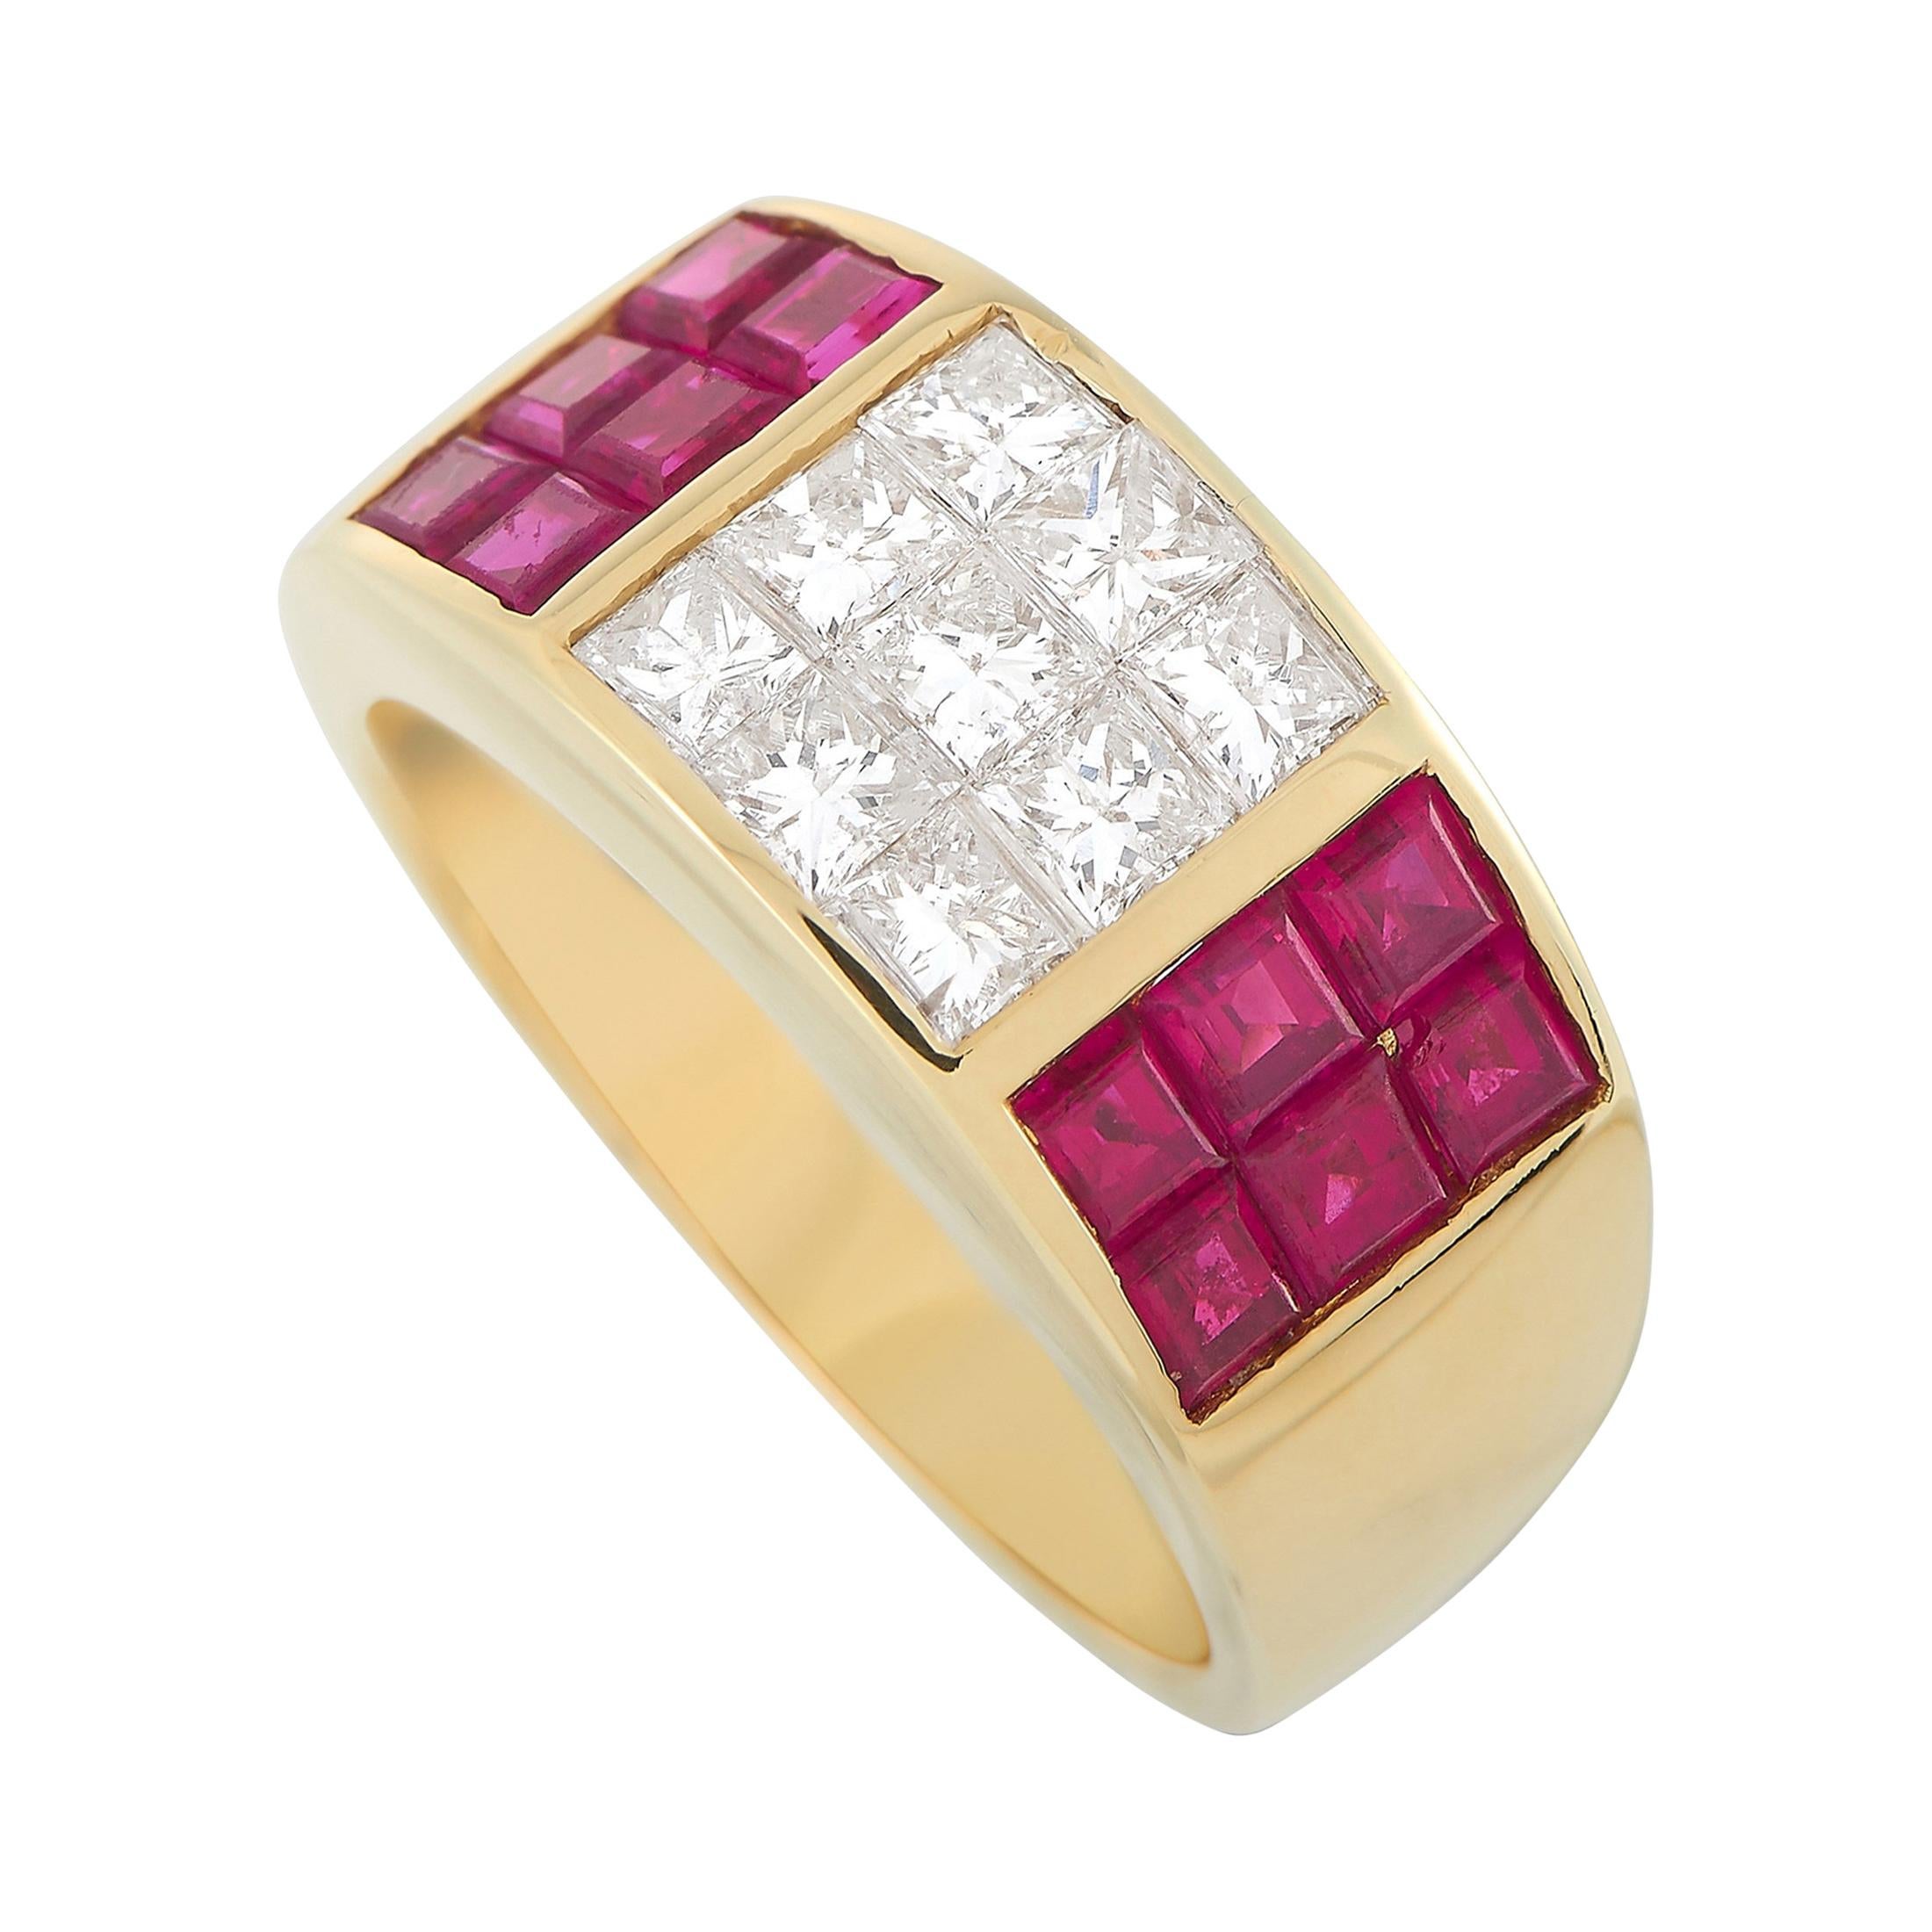 LB Exclusive 18k Yellow Gold 0.89 Ct Diamond and Ruby Ring